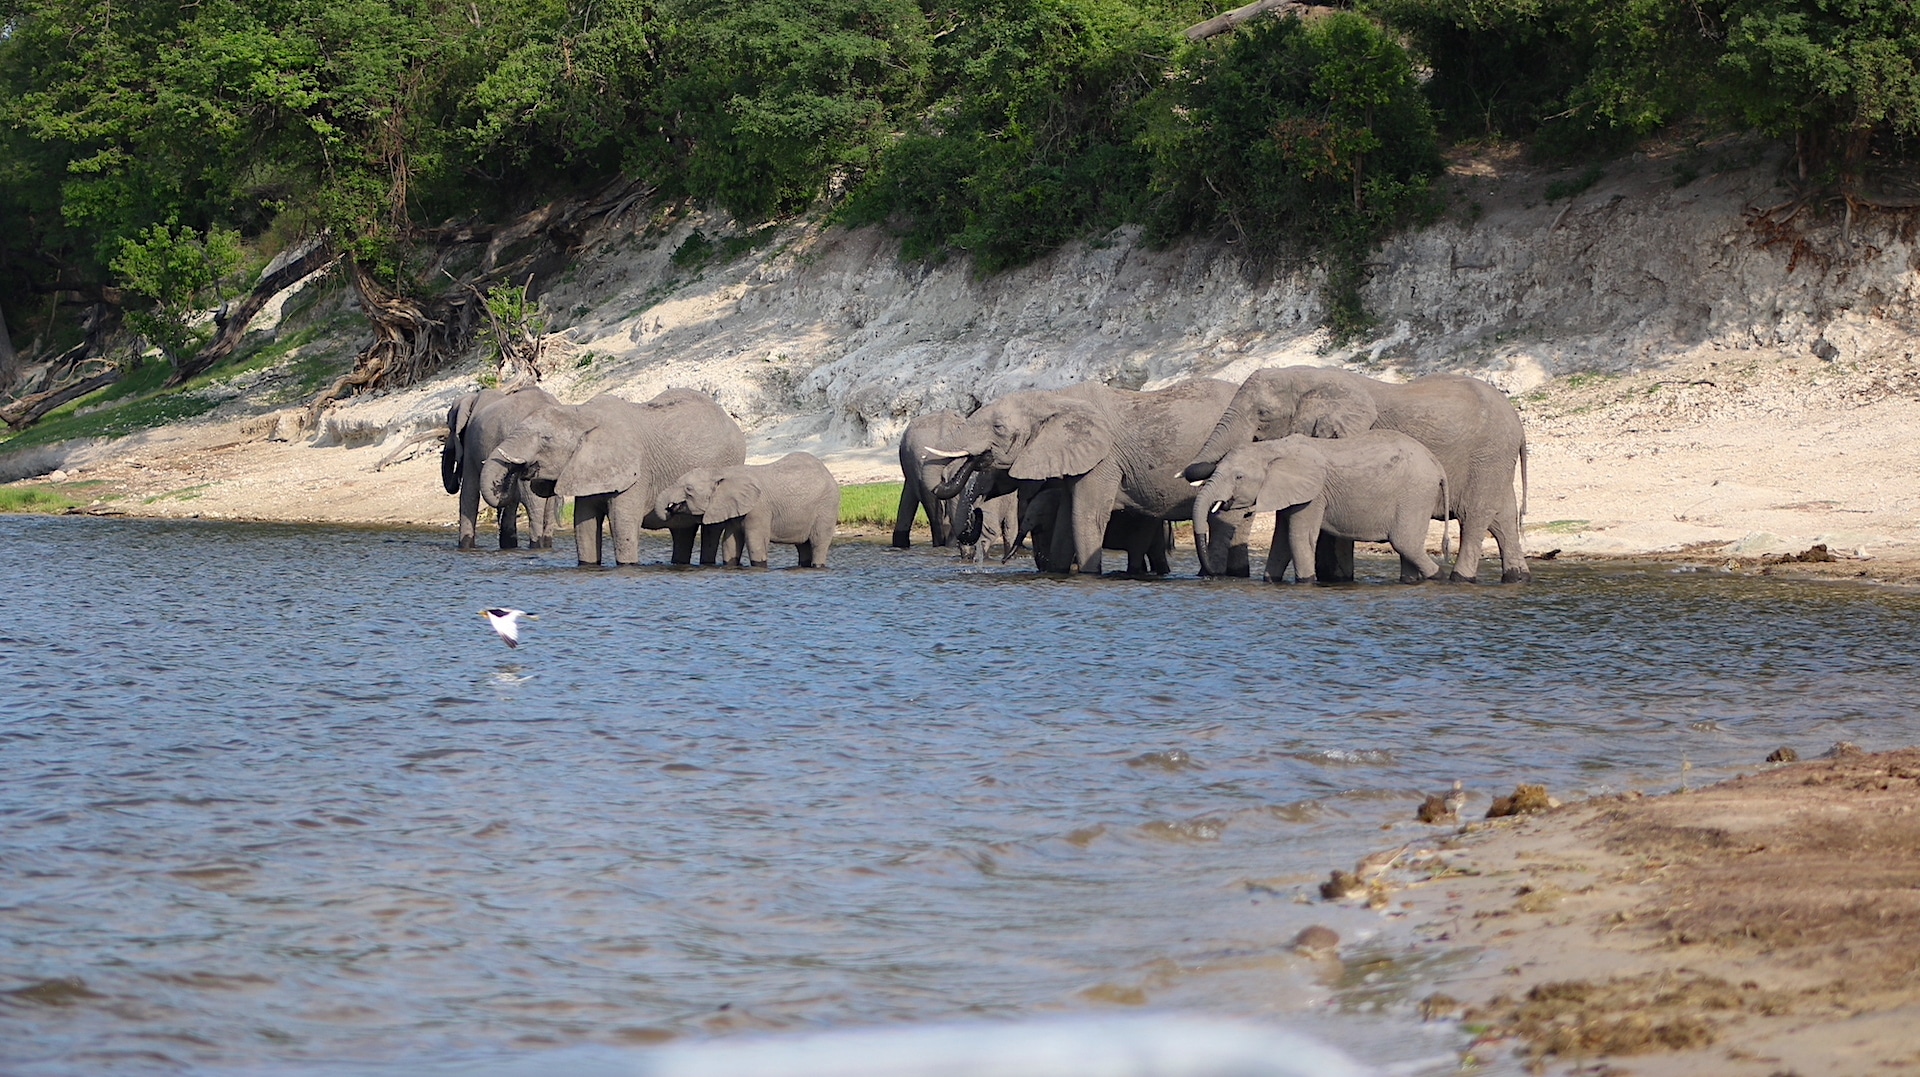 elephants of Chobe drinking in the heat of the day